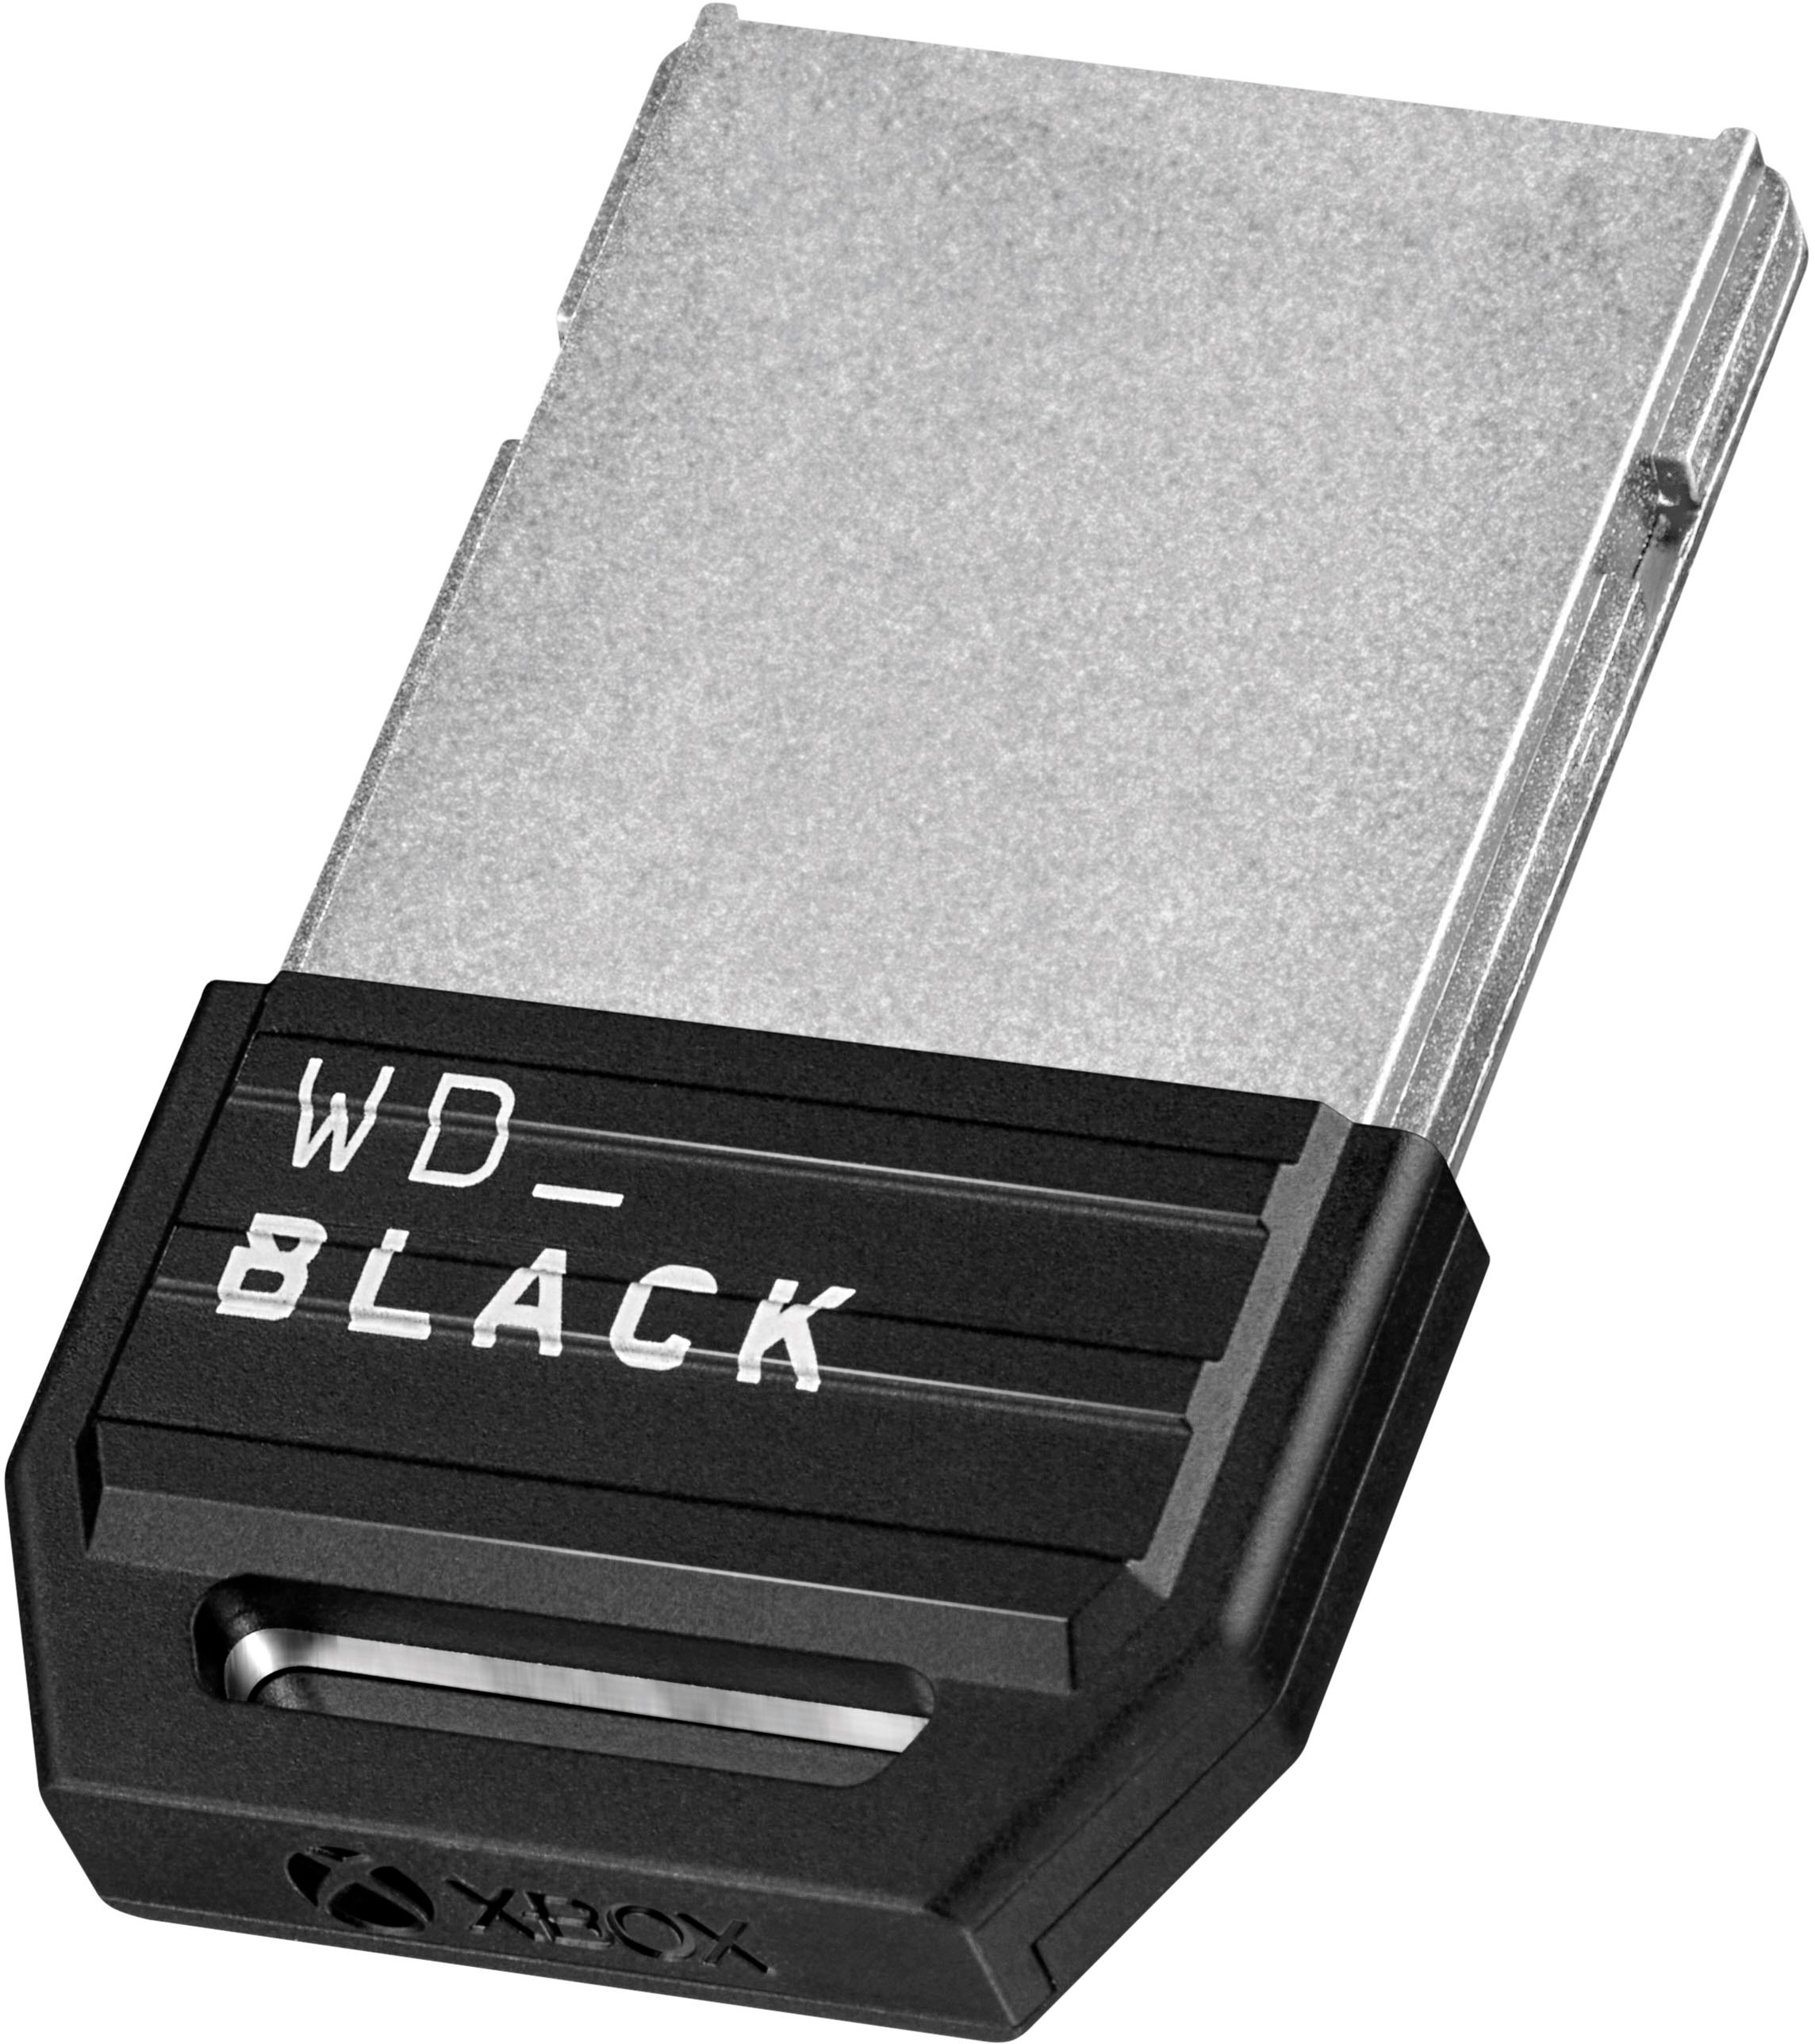 Angle View: WD - BLACK C50 1TB Expansion Card for Xbox Series X|S Gaming Console SSD Storage - Black